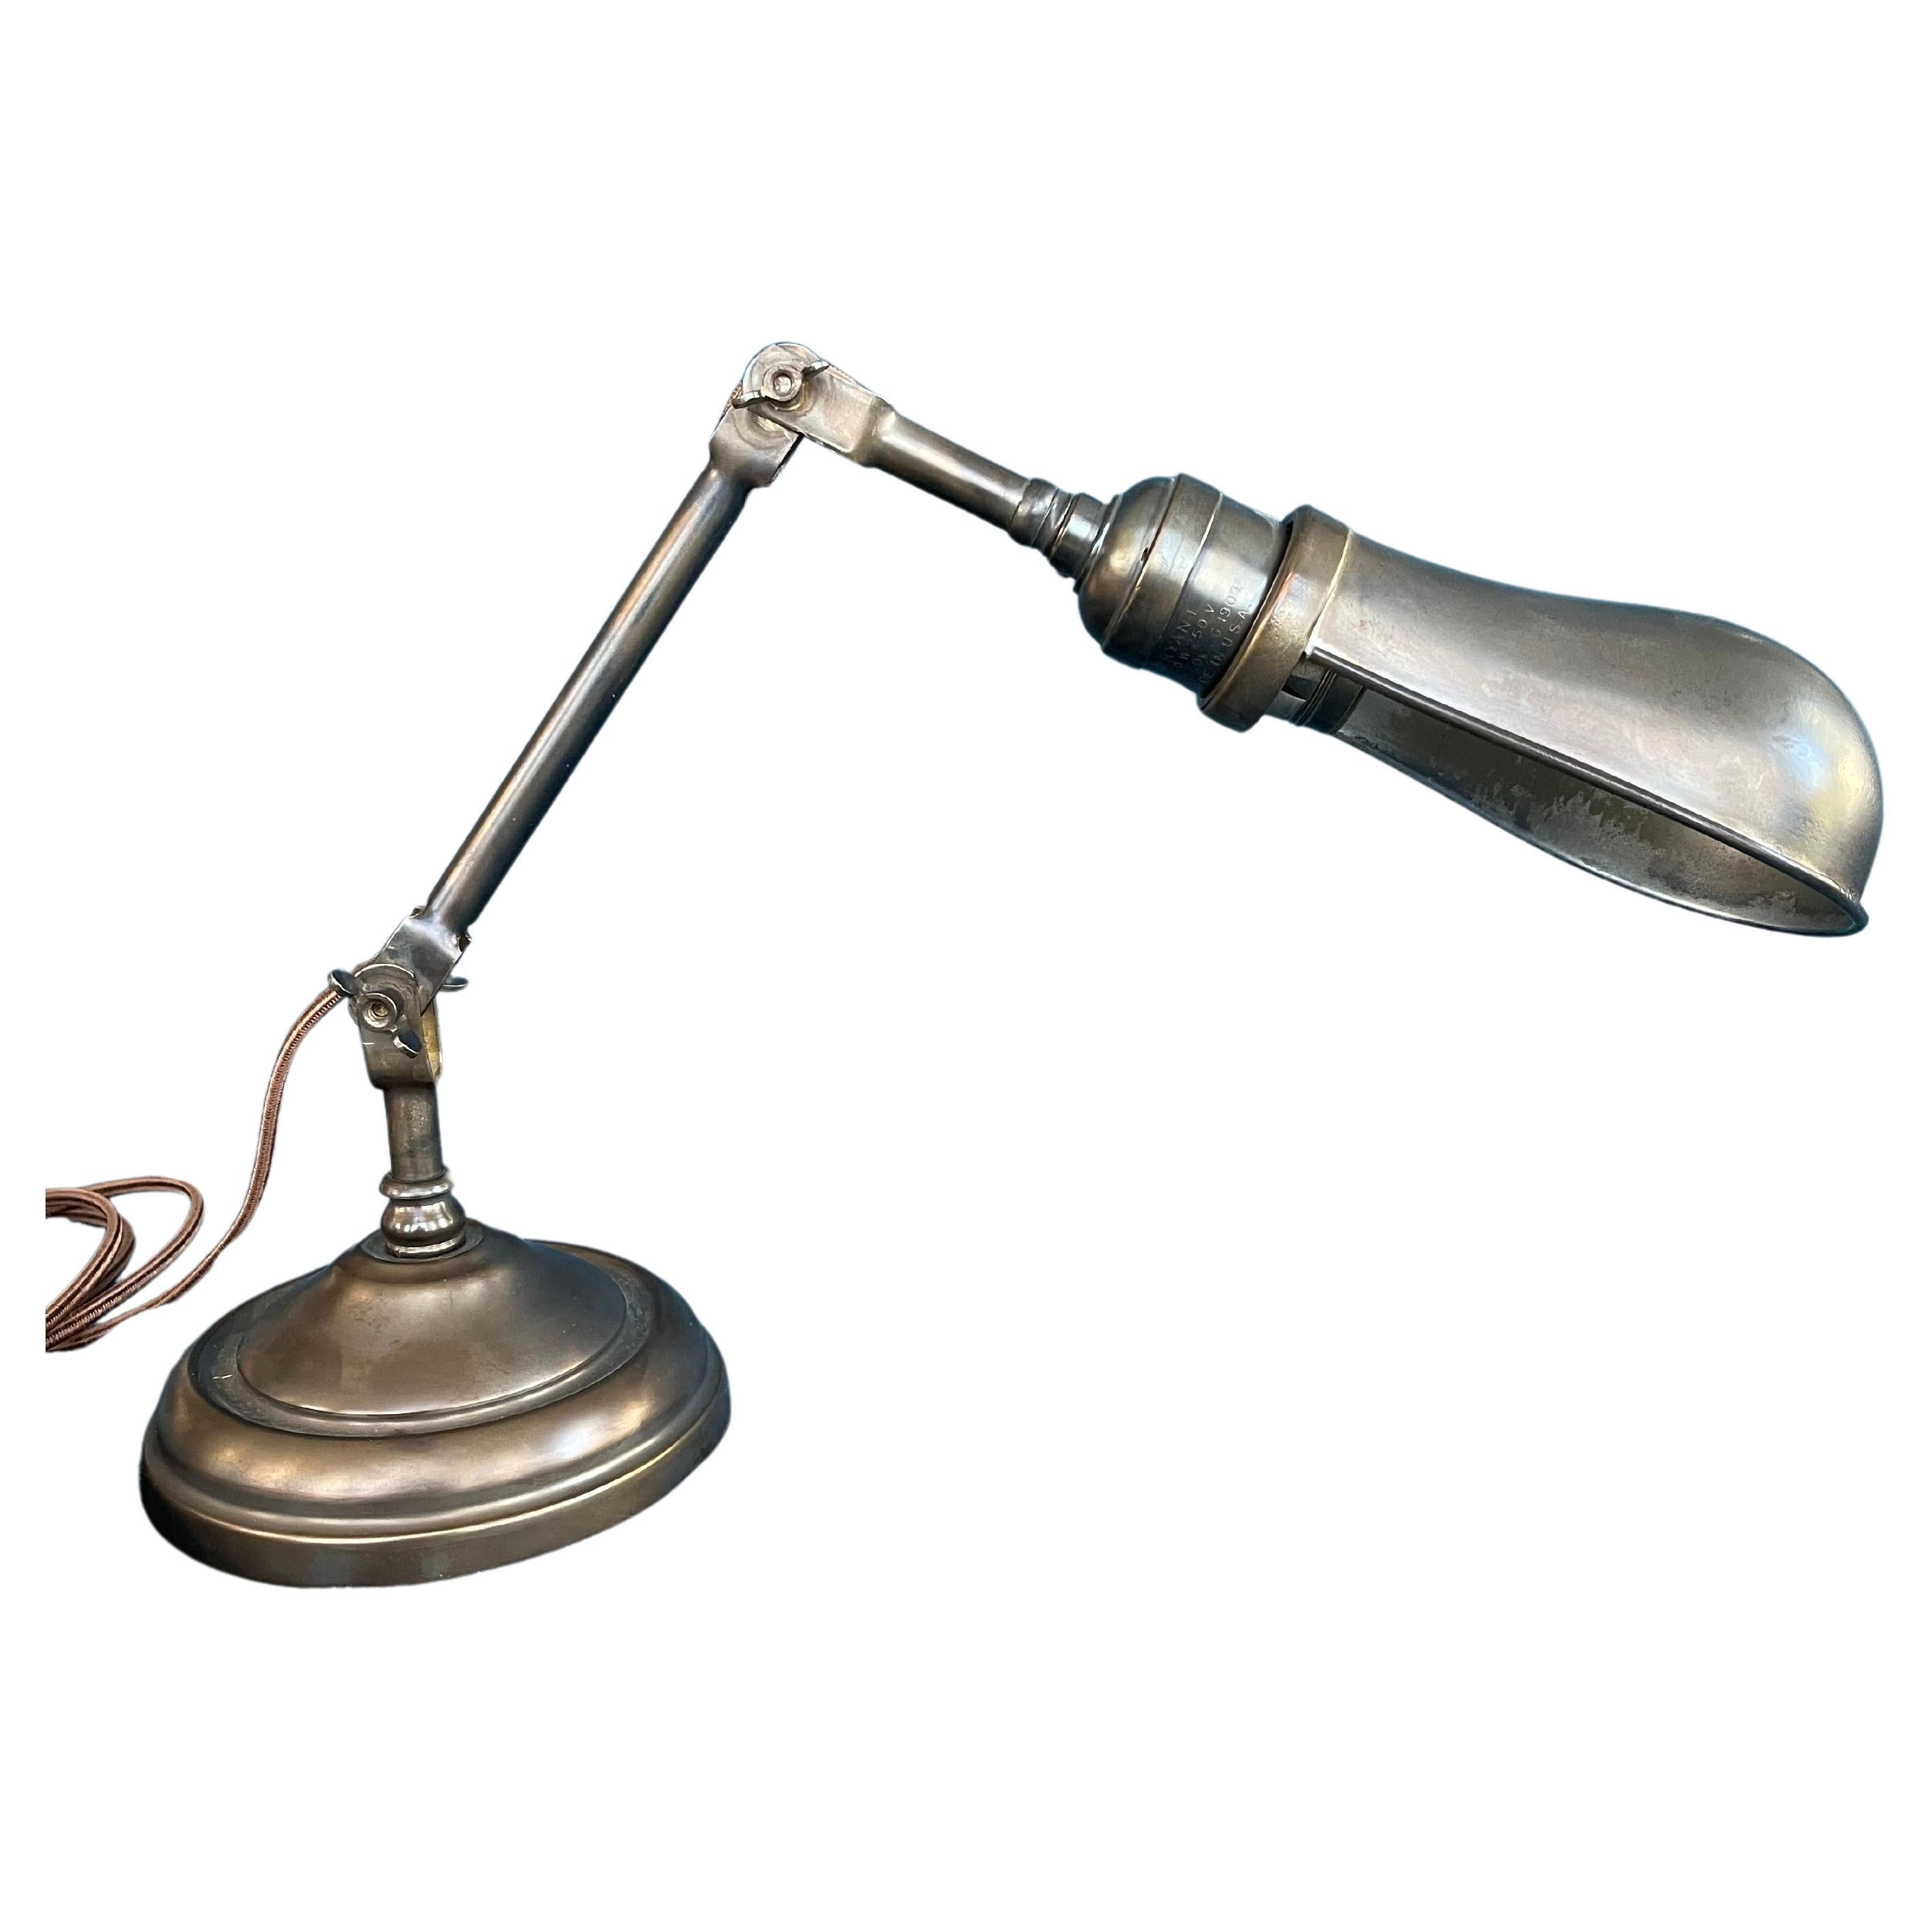  This most useful lamp was made by the Faries Lamp Co. This lamp has 2 points where the angle can be adjusted by just loosening the wing nuts in the 2 areas. The shade also swivels. It has an iron weight so that at any angle it won't tip over. Our